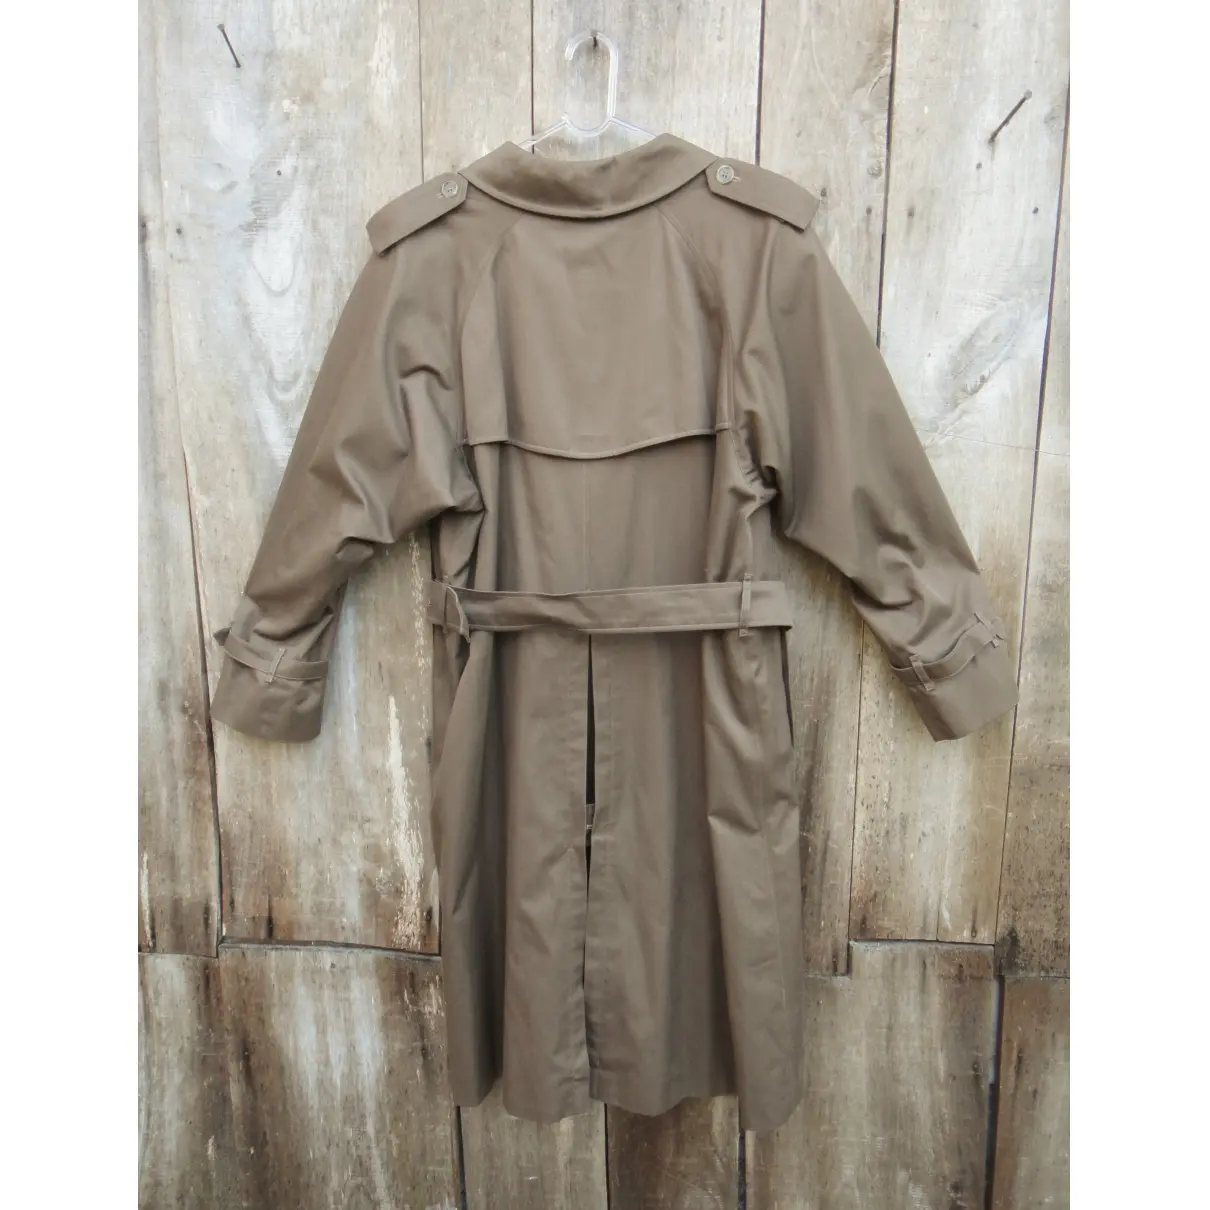 Burberry Trench coat for sale - Vintage